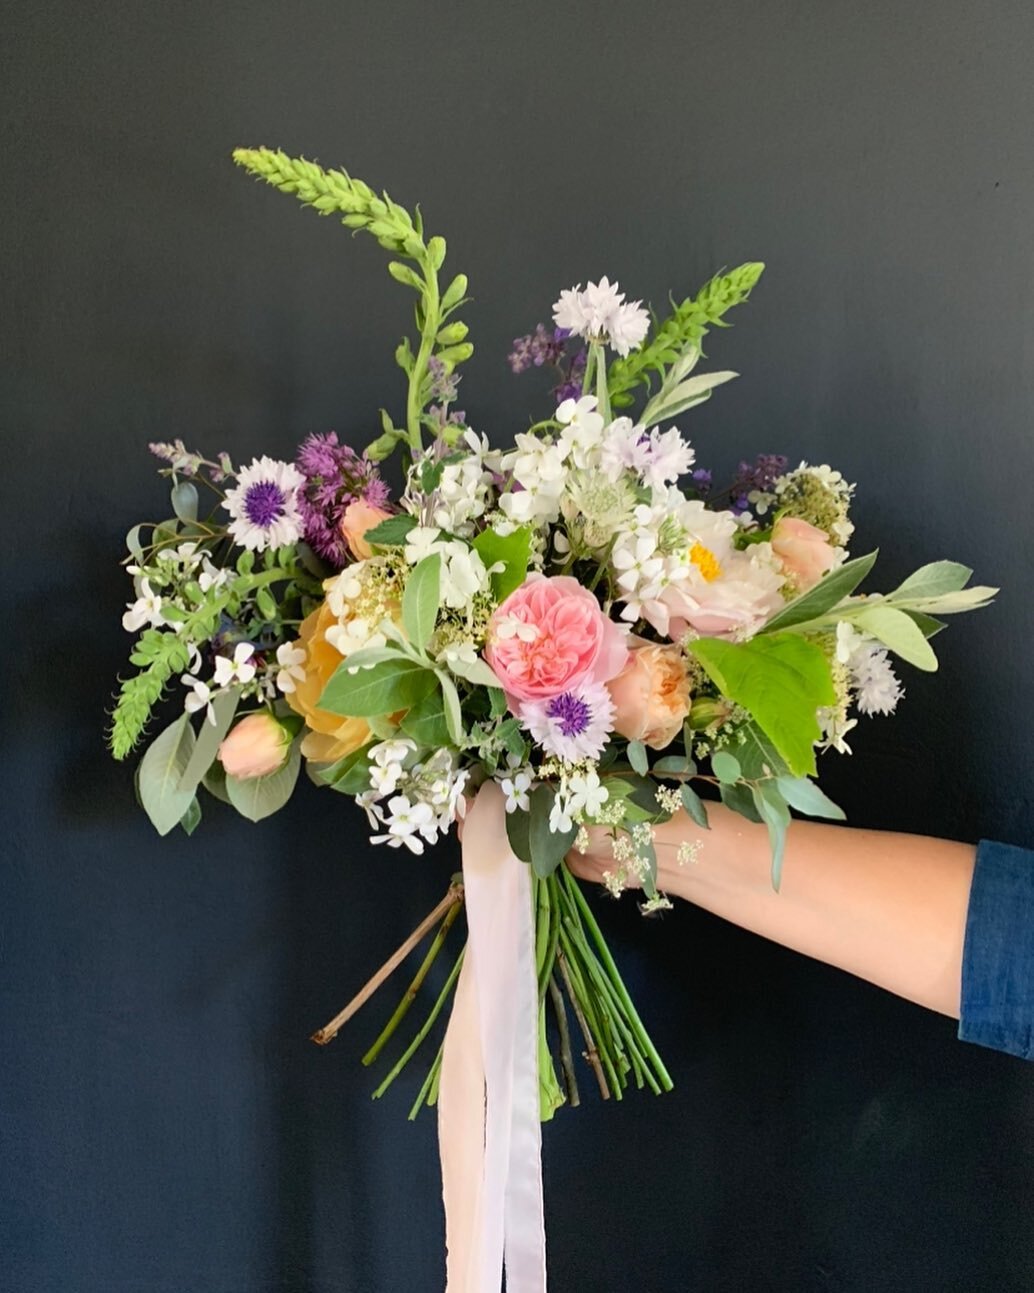 Yes 🙌 the ☀️ has finally made an appearance today and it&rsquo;s making me excited for all the gorgeous spring summer weddings we have planned this year. 
In the meantime I&rsquo;m throwing it back to this beauty made with all British grown blooms f